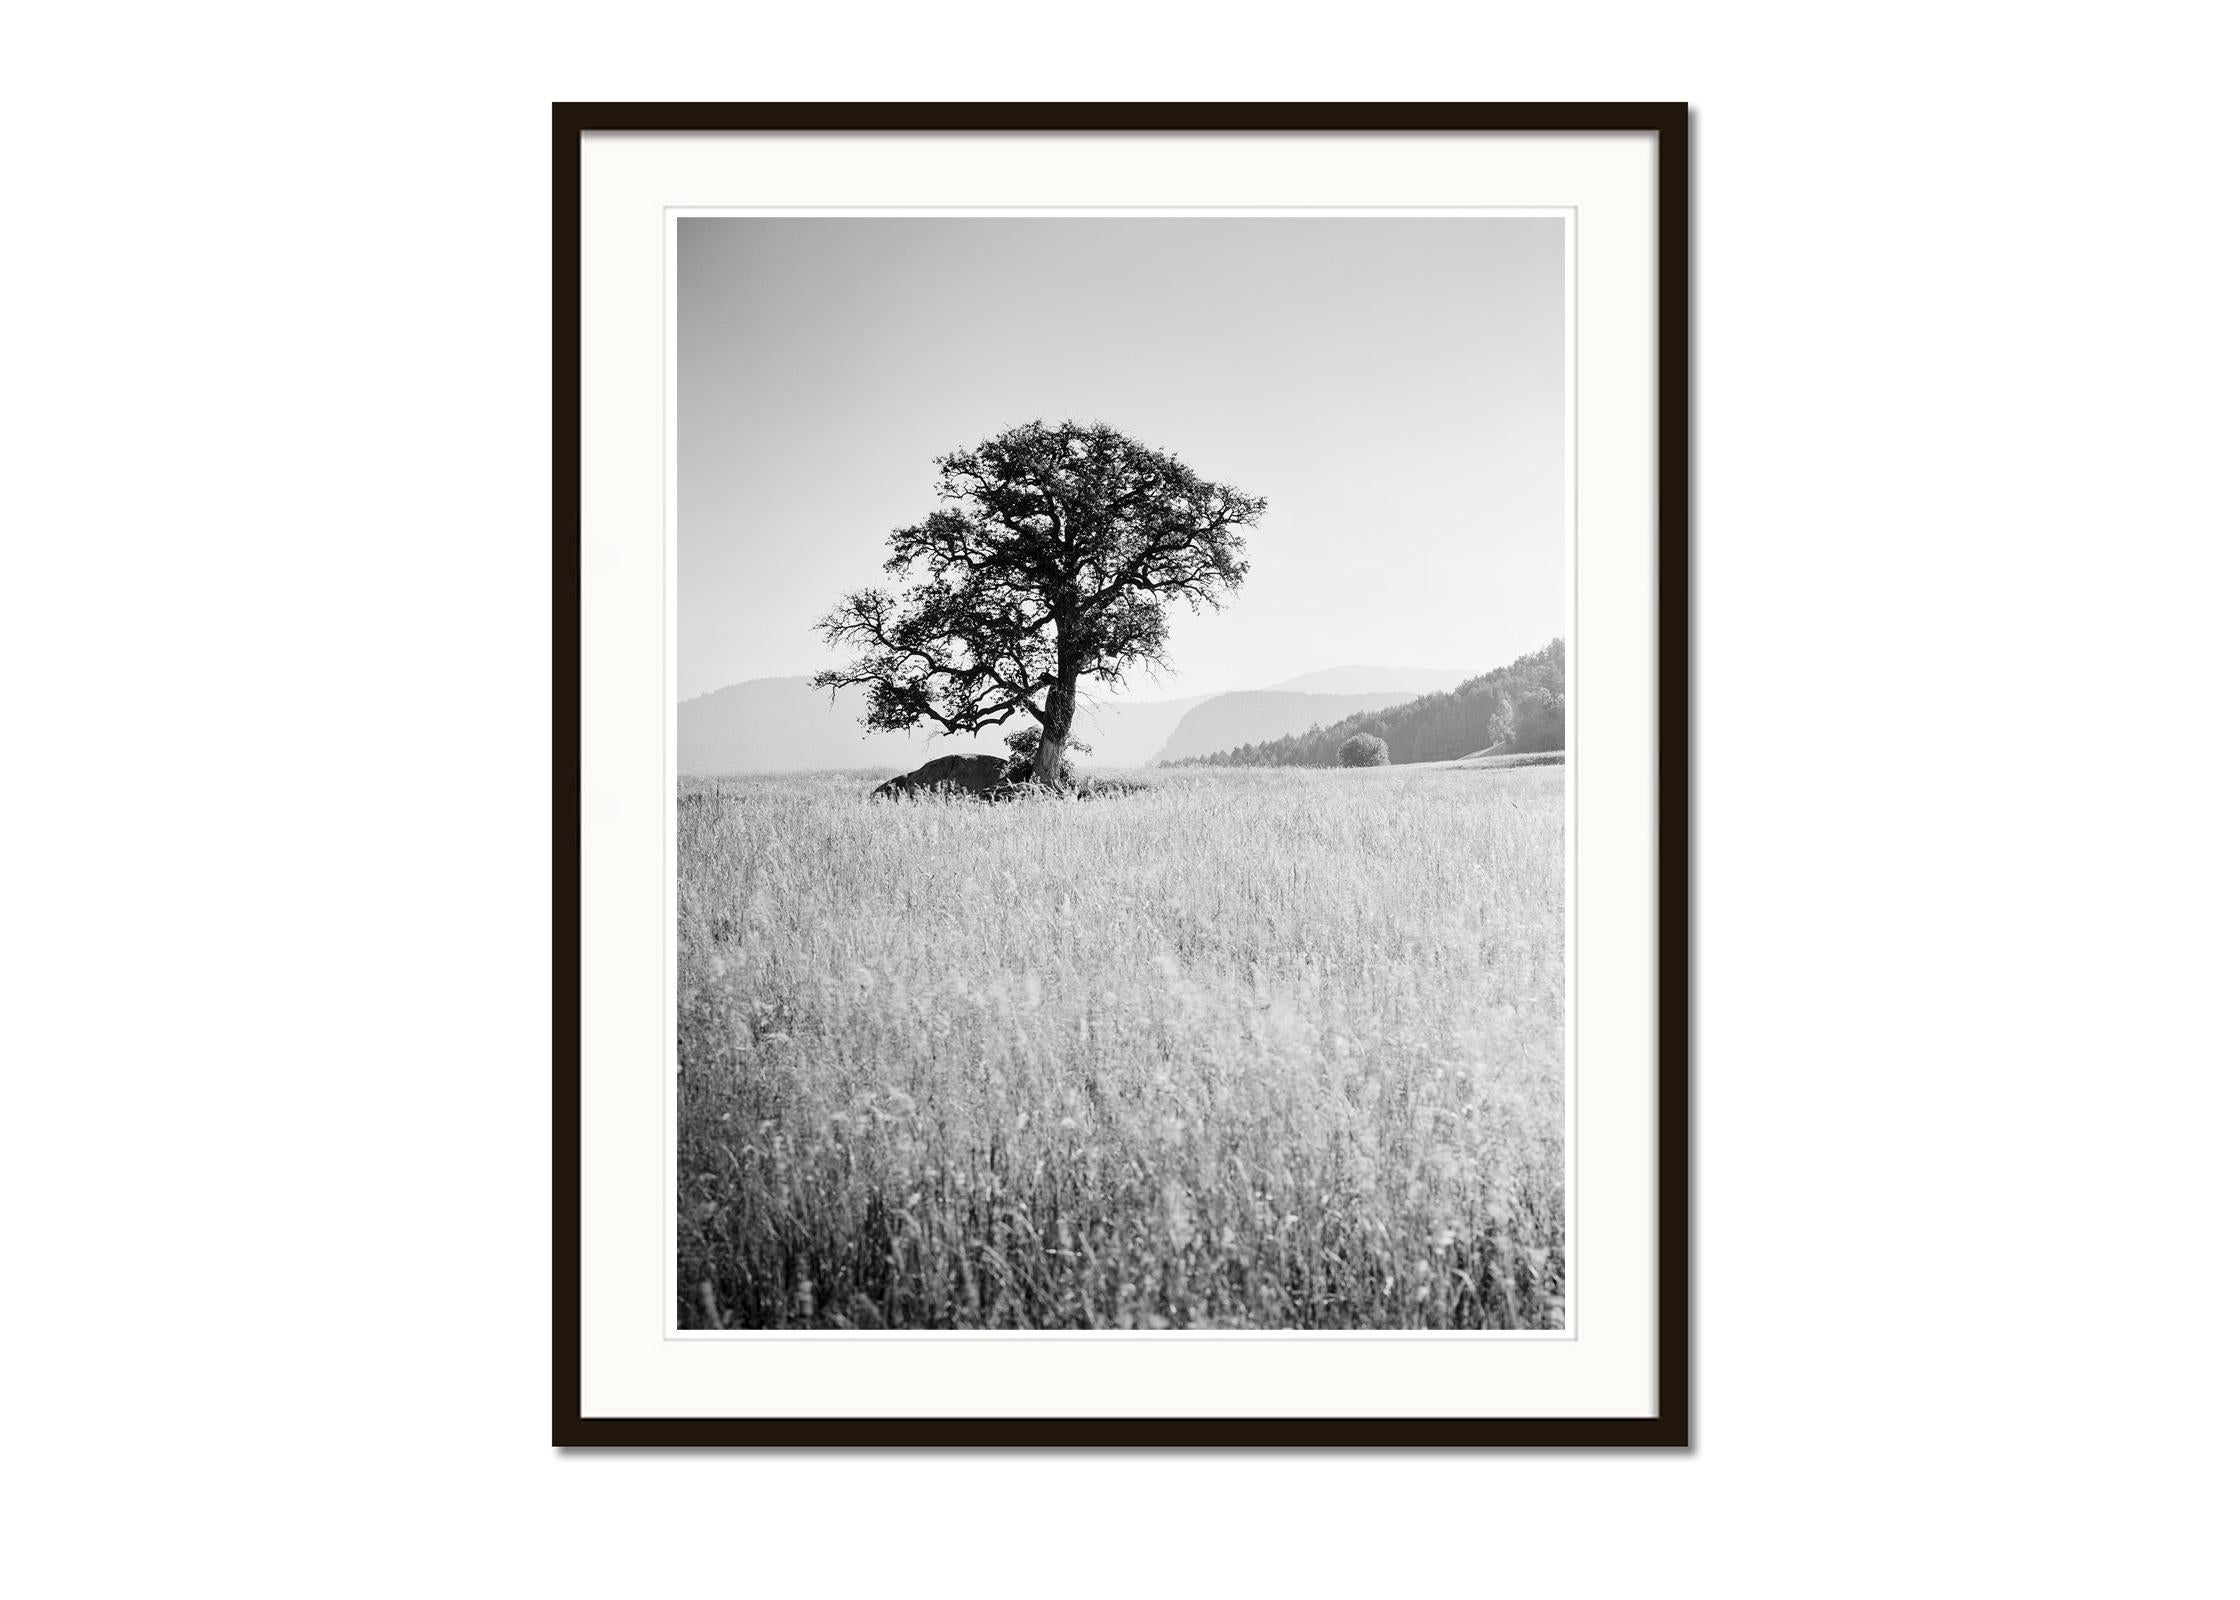 Morning Sun, single tree, Seiser Alm, black and white landscape, art photography - Gray Black and White Photograph by Gerald Berghammer